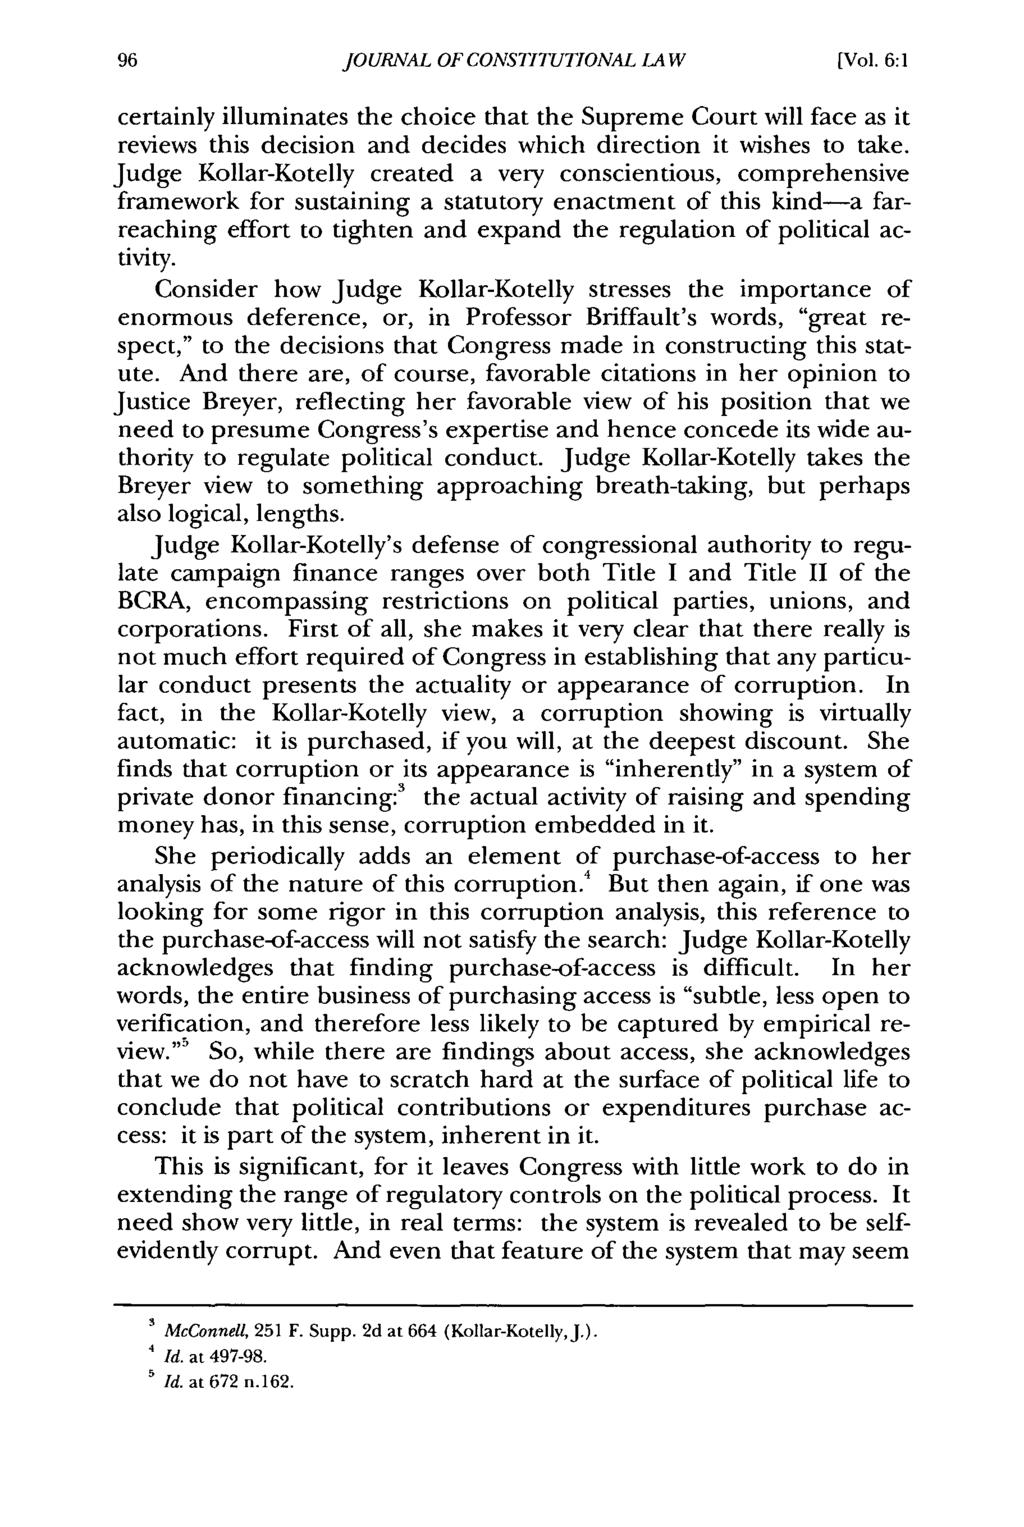 JOURNAL OF CONS 77TUTIONAL LA W [Vol. 6:1 certainly illuminates the choice that the Supreme Court will face as it reviews this decision and decides which direction it wishes to take.